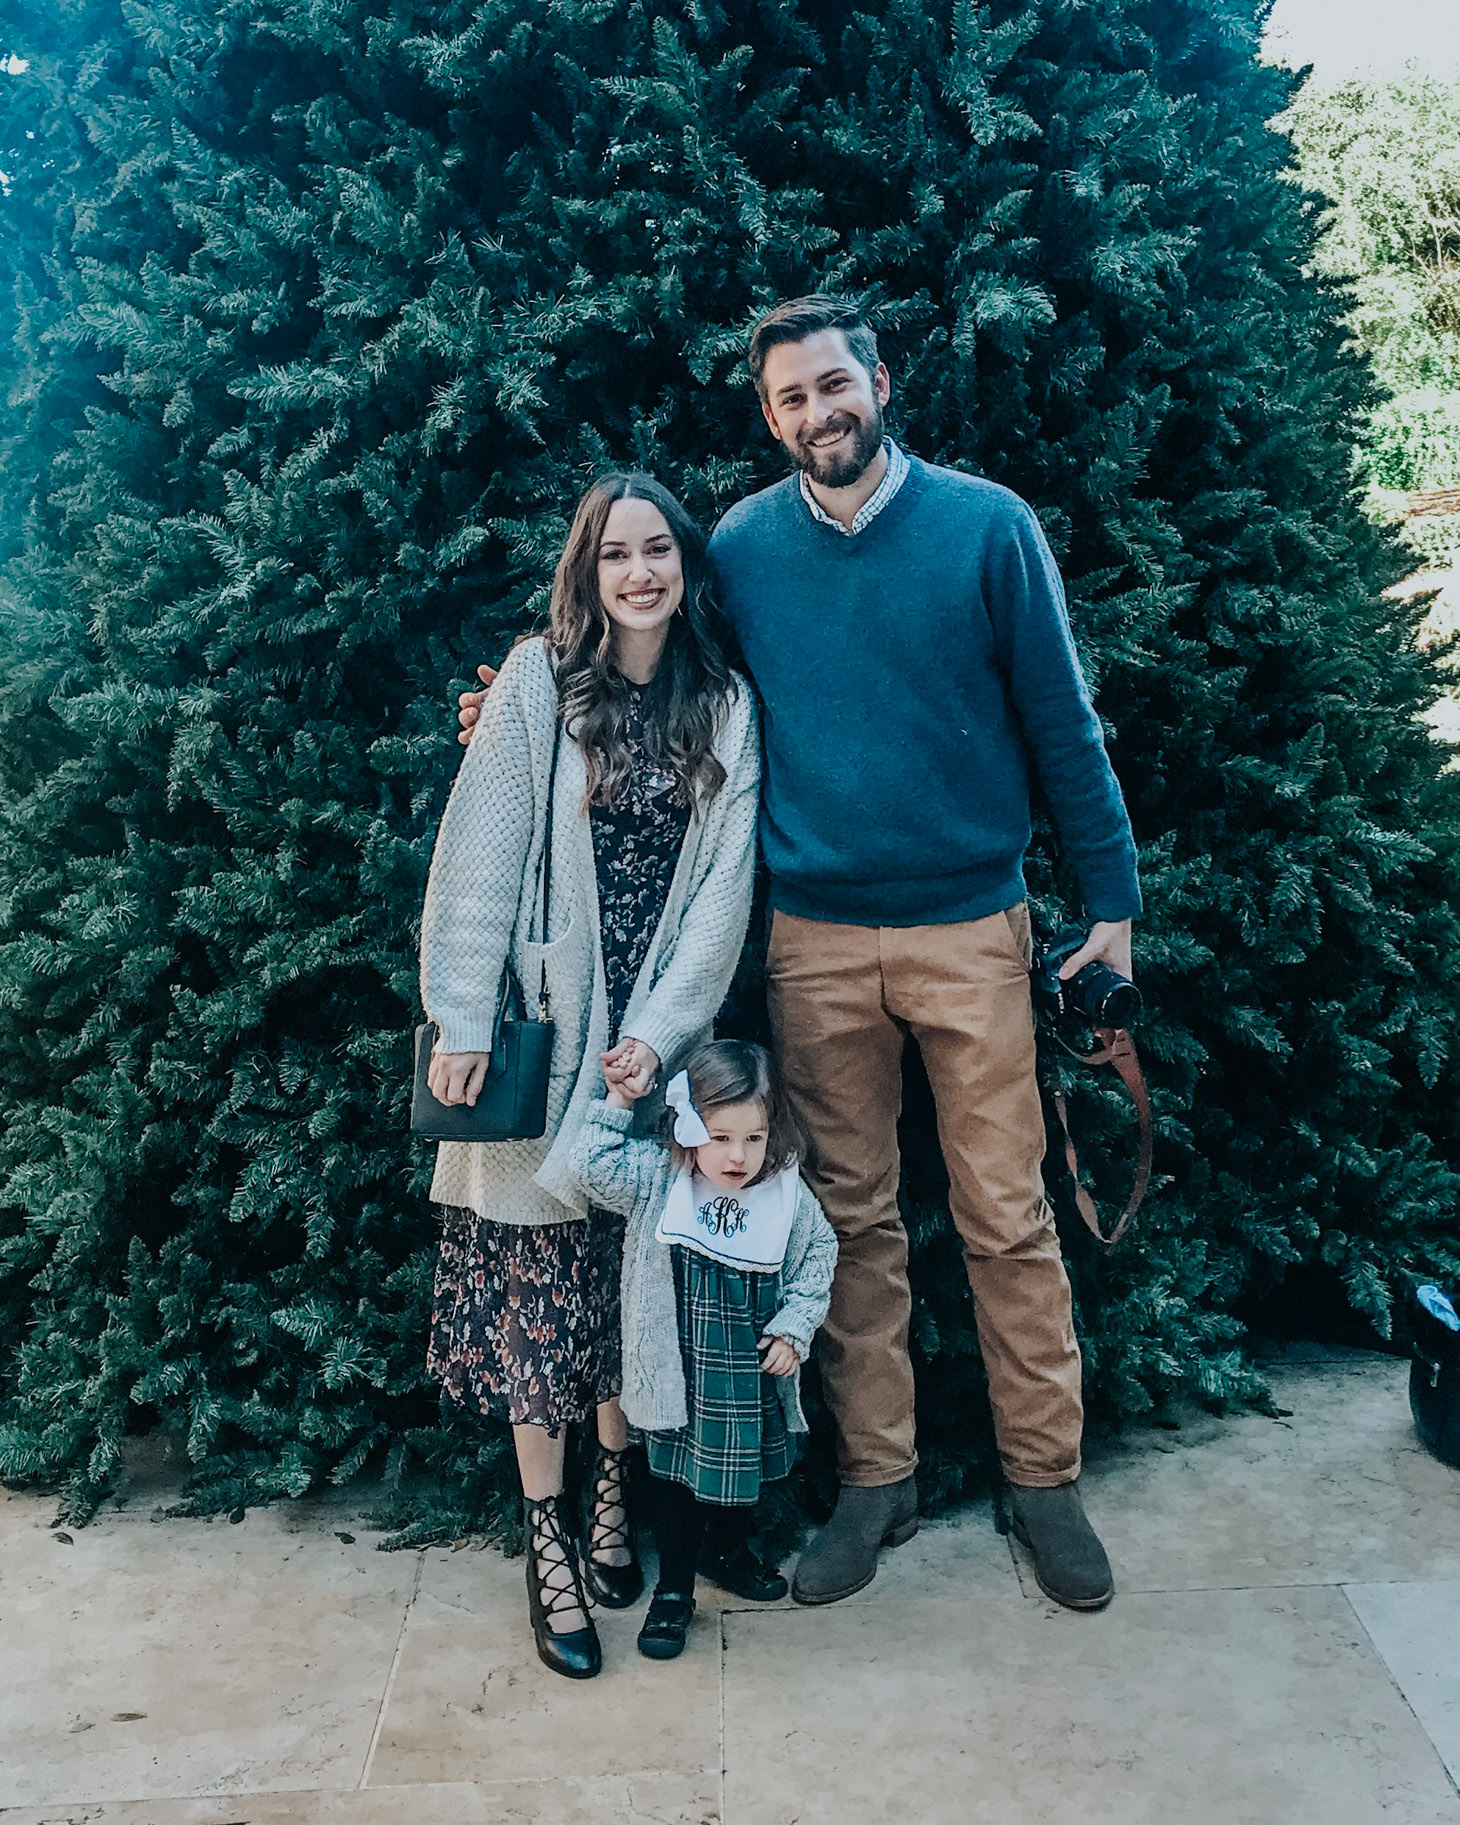 San Antonio in Winter featured by top US travel blog Lone Star Looking Glass; Image of family in front of Christmas tree.